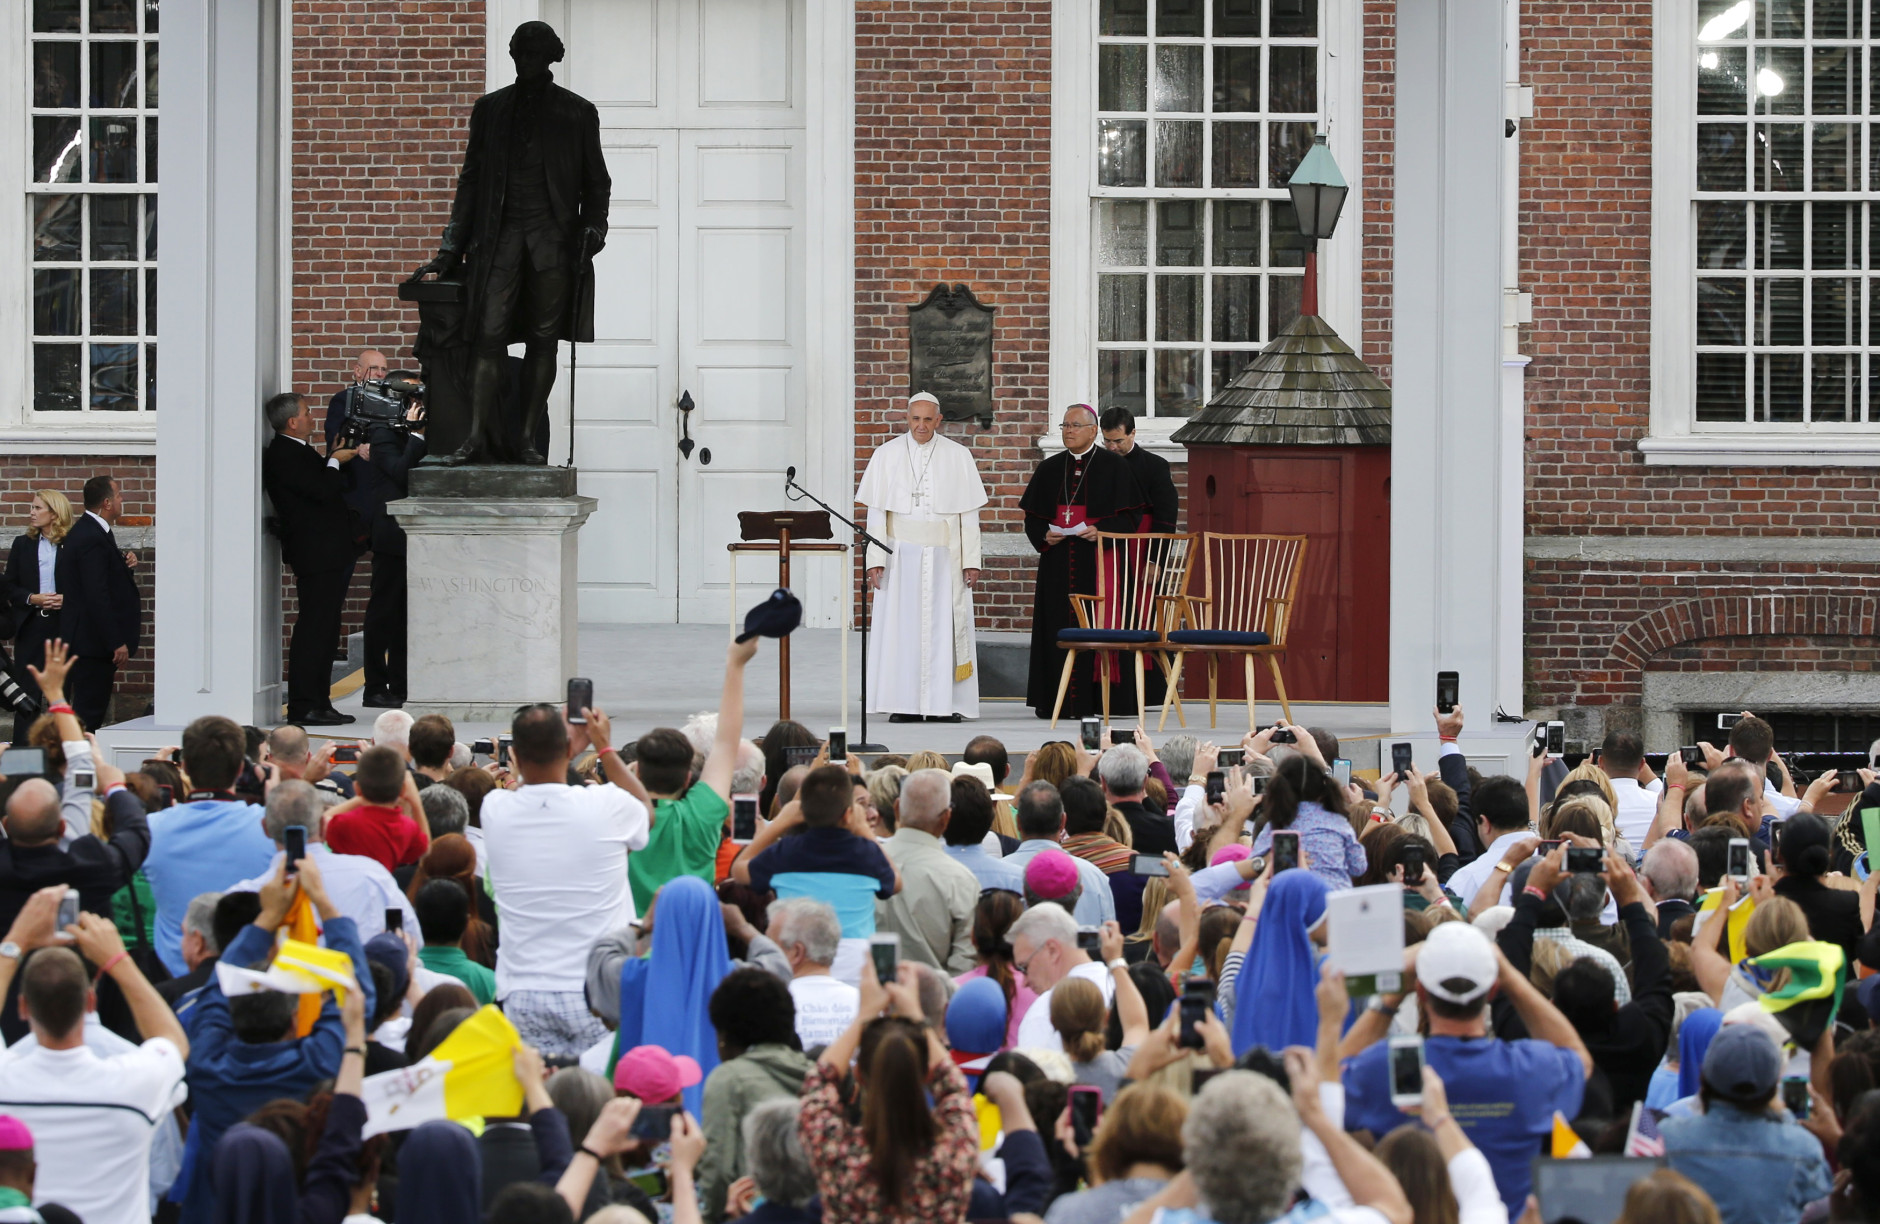 PHILADELPHIA, PA - SEPTEMBER 26: Pope Francis arrives to speak at Independence Mall to watch Pope Francis speak in Philadelphia onSeptember 26, 2015 in Philadelphia., Pennsylvania. After visiting Washington and New York City, Pope Francis concludes his tour of the U.S. with events in Philadelphia on Saturday and Sunday. (Photo by Jim Bourg-Pool/Getty Images)